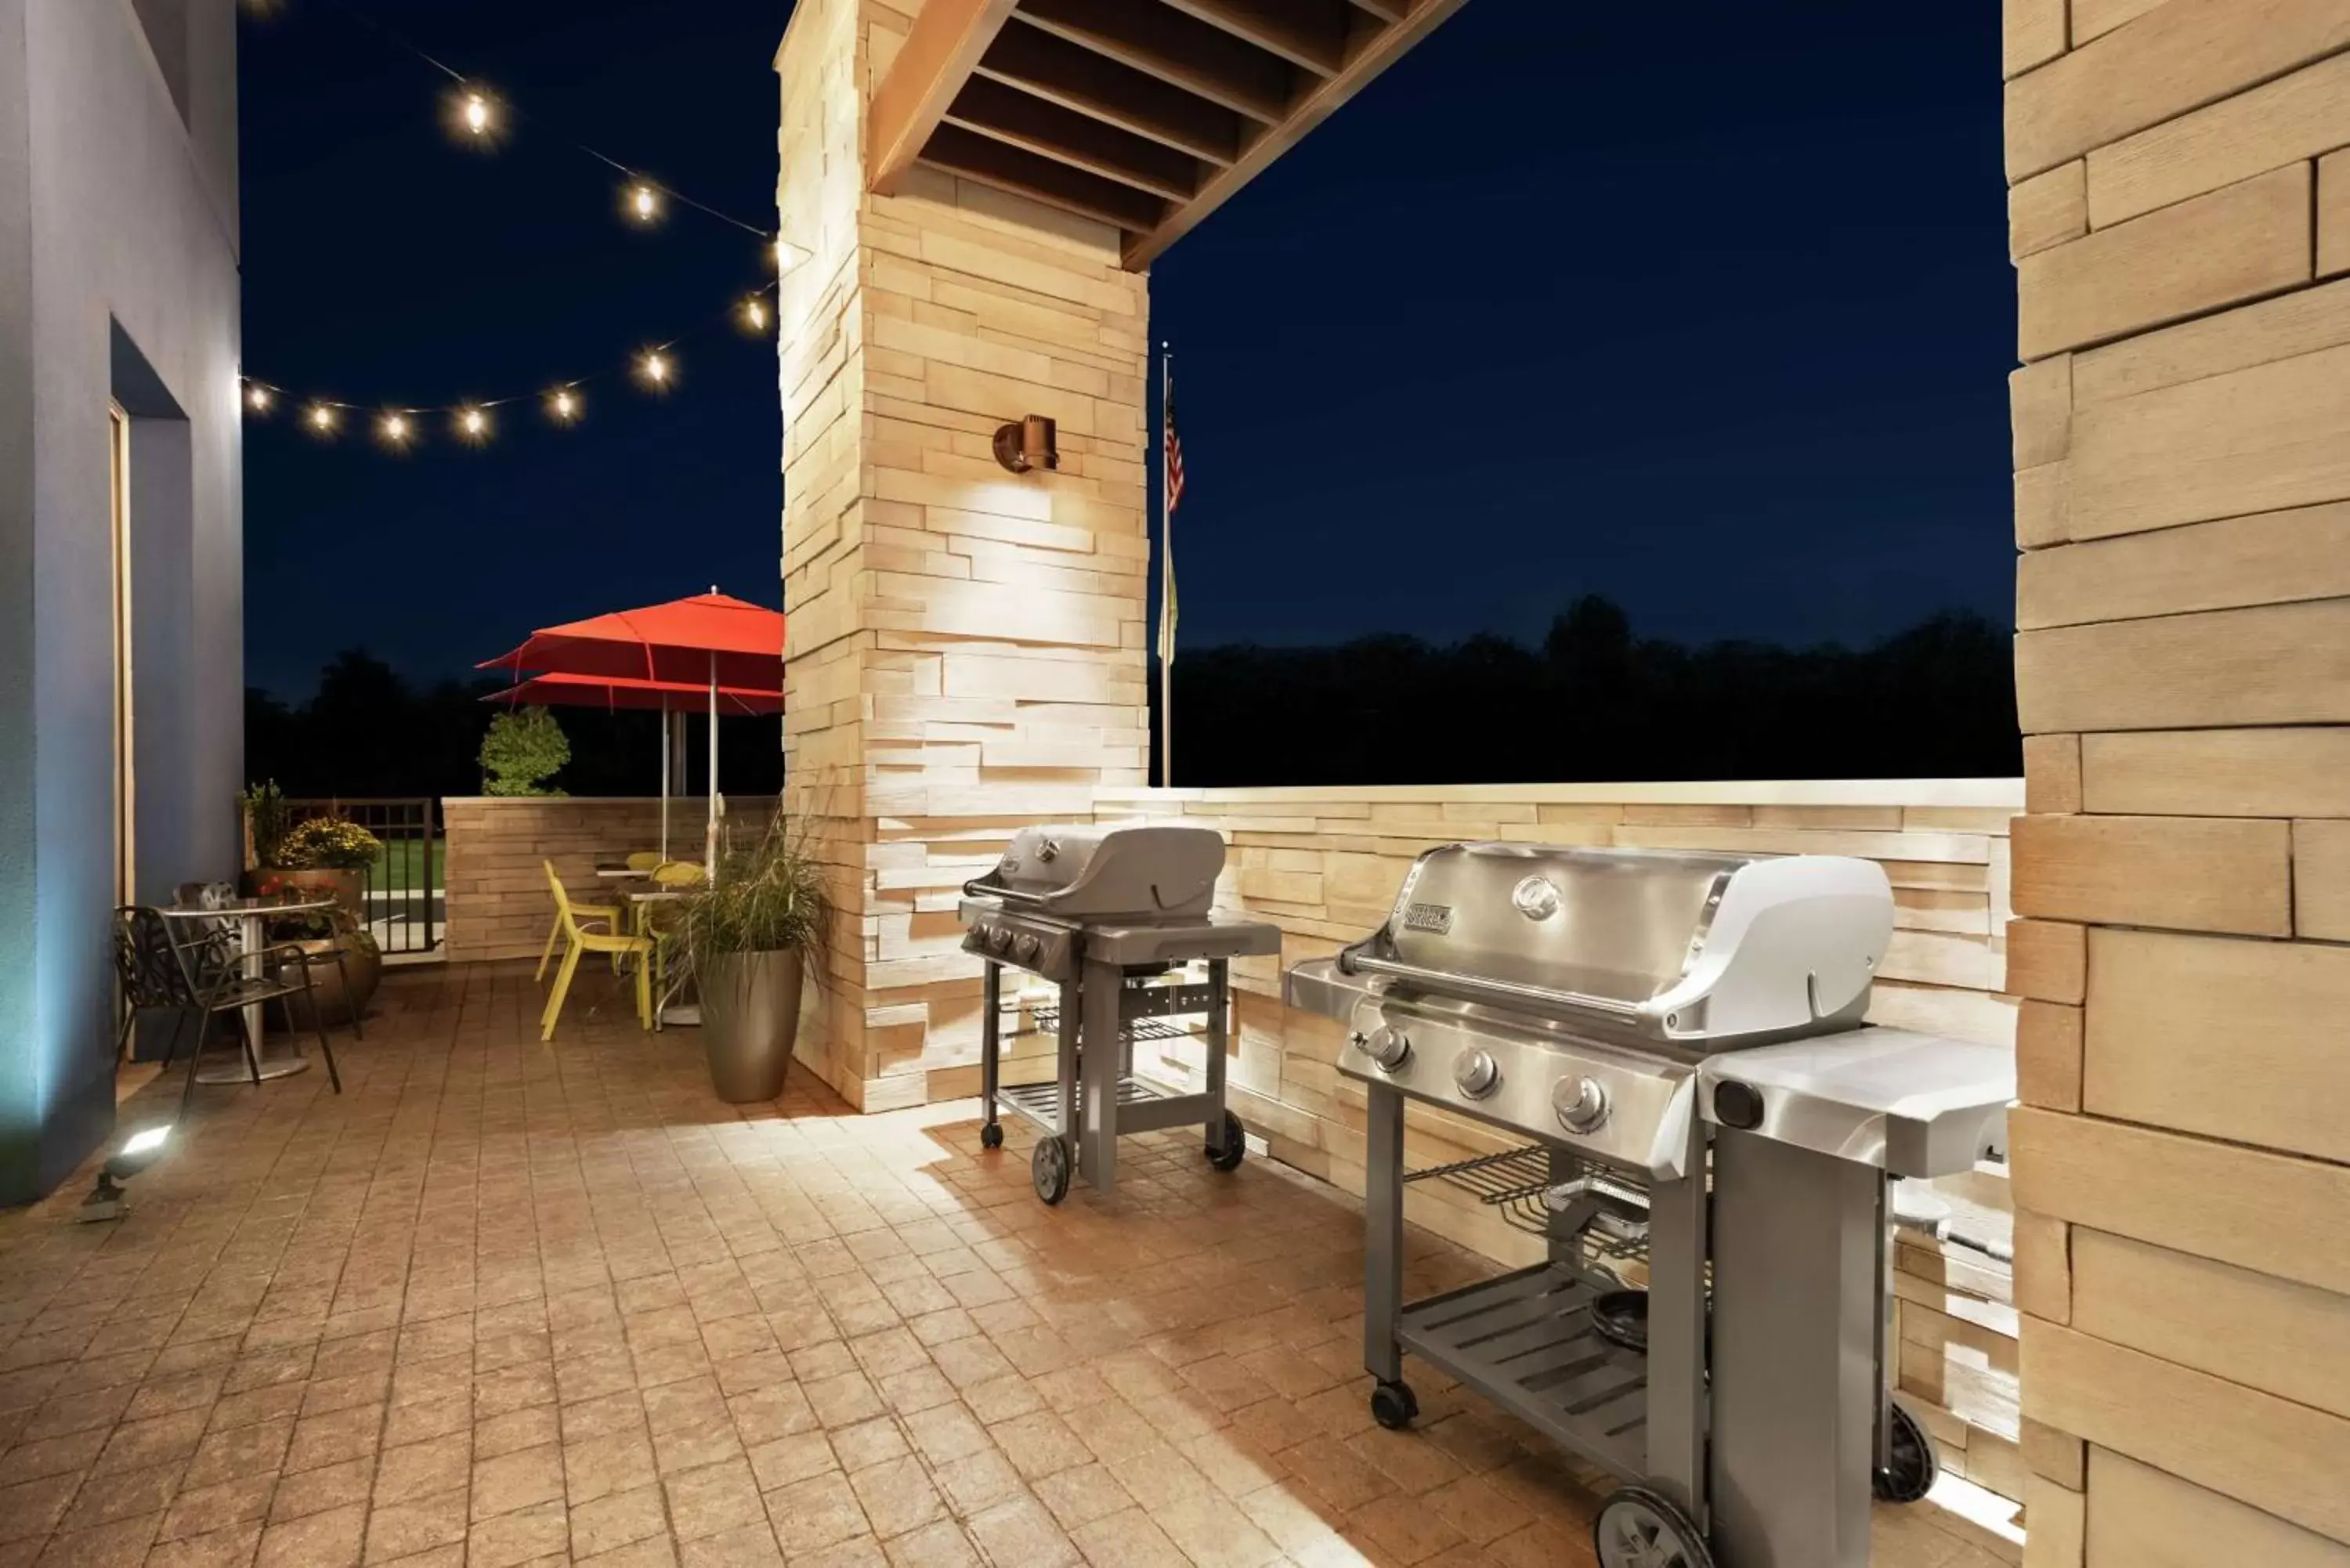 Patio, BBQ Facilities in Home2 Suites By Hilton Columbia Harbison